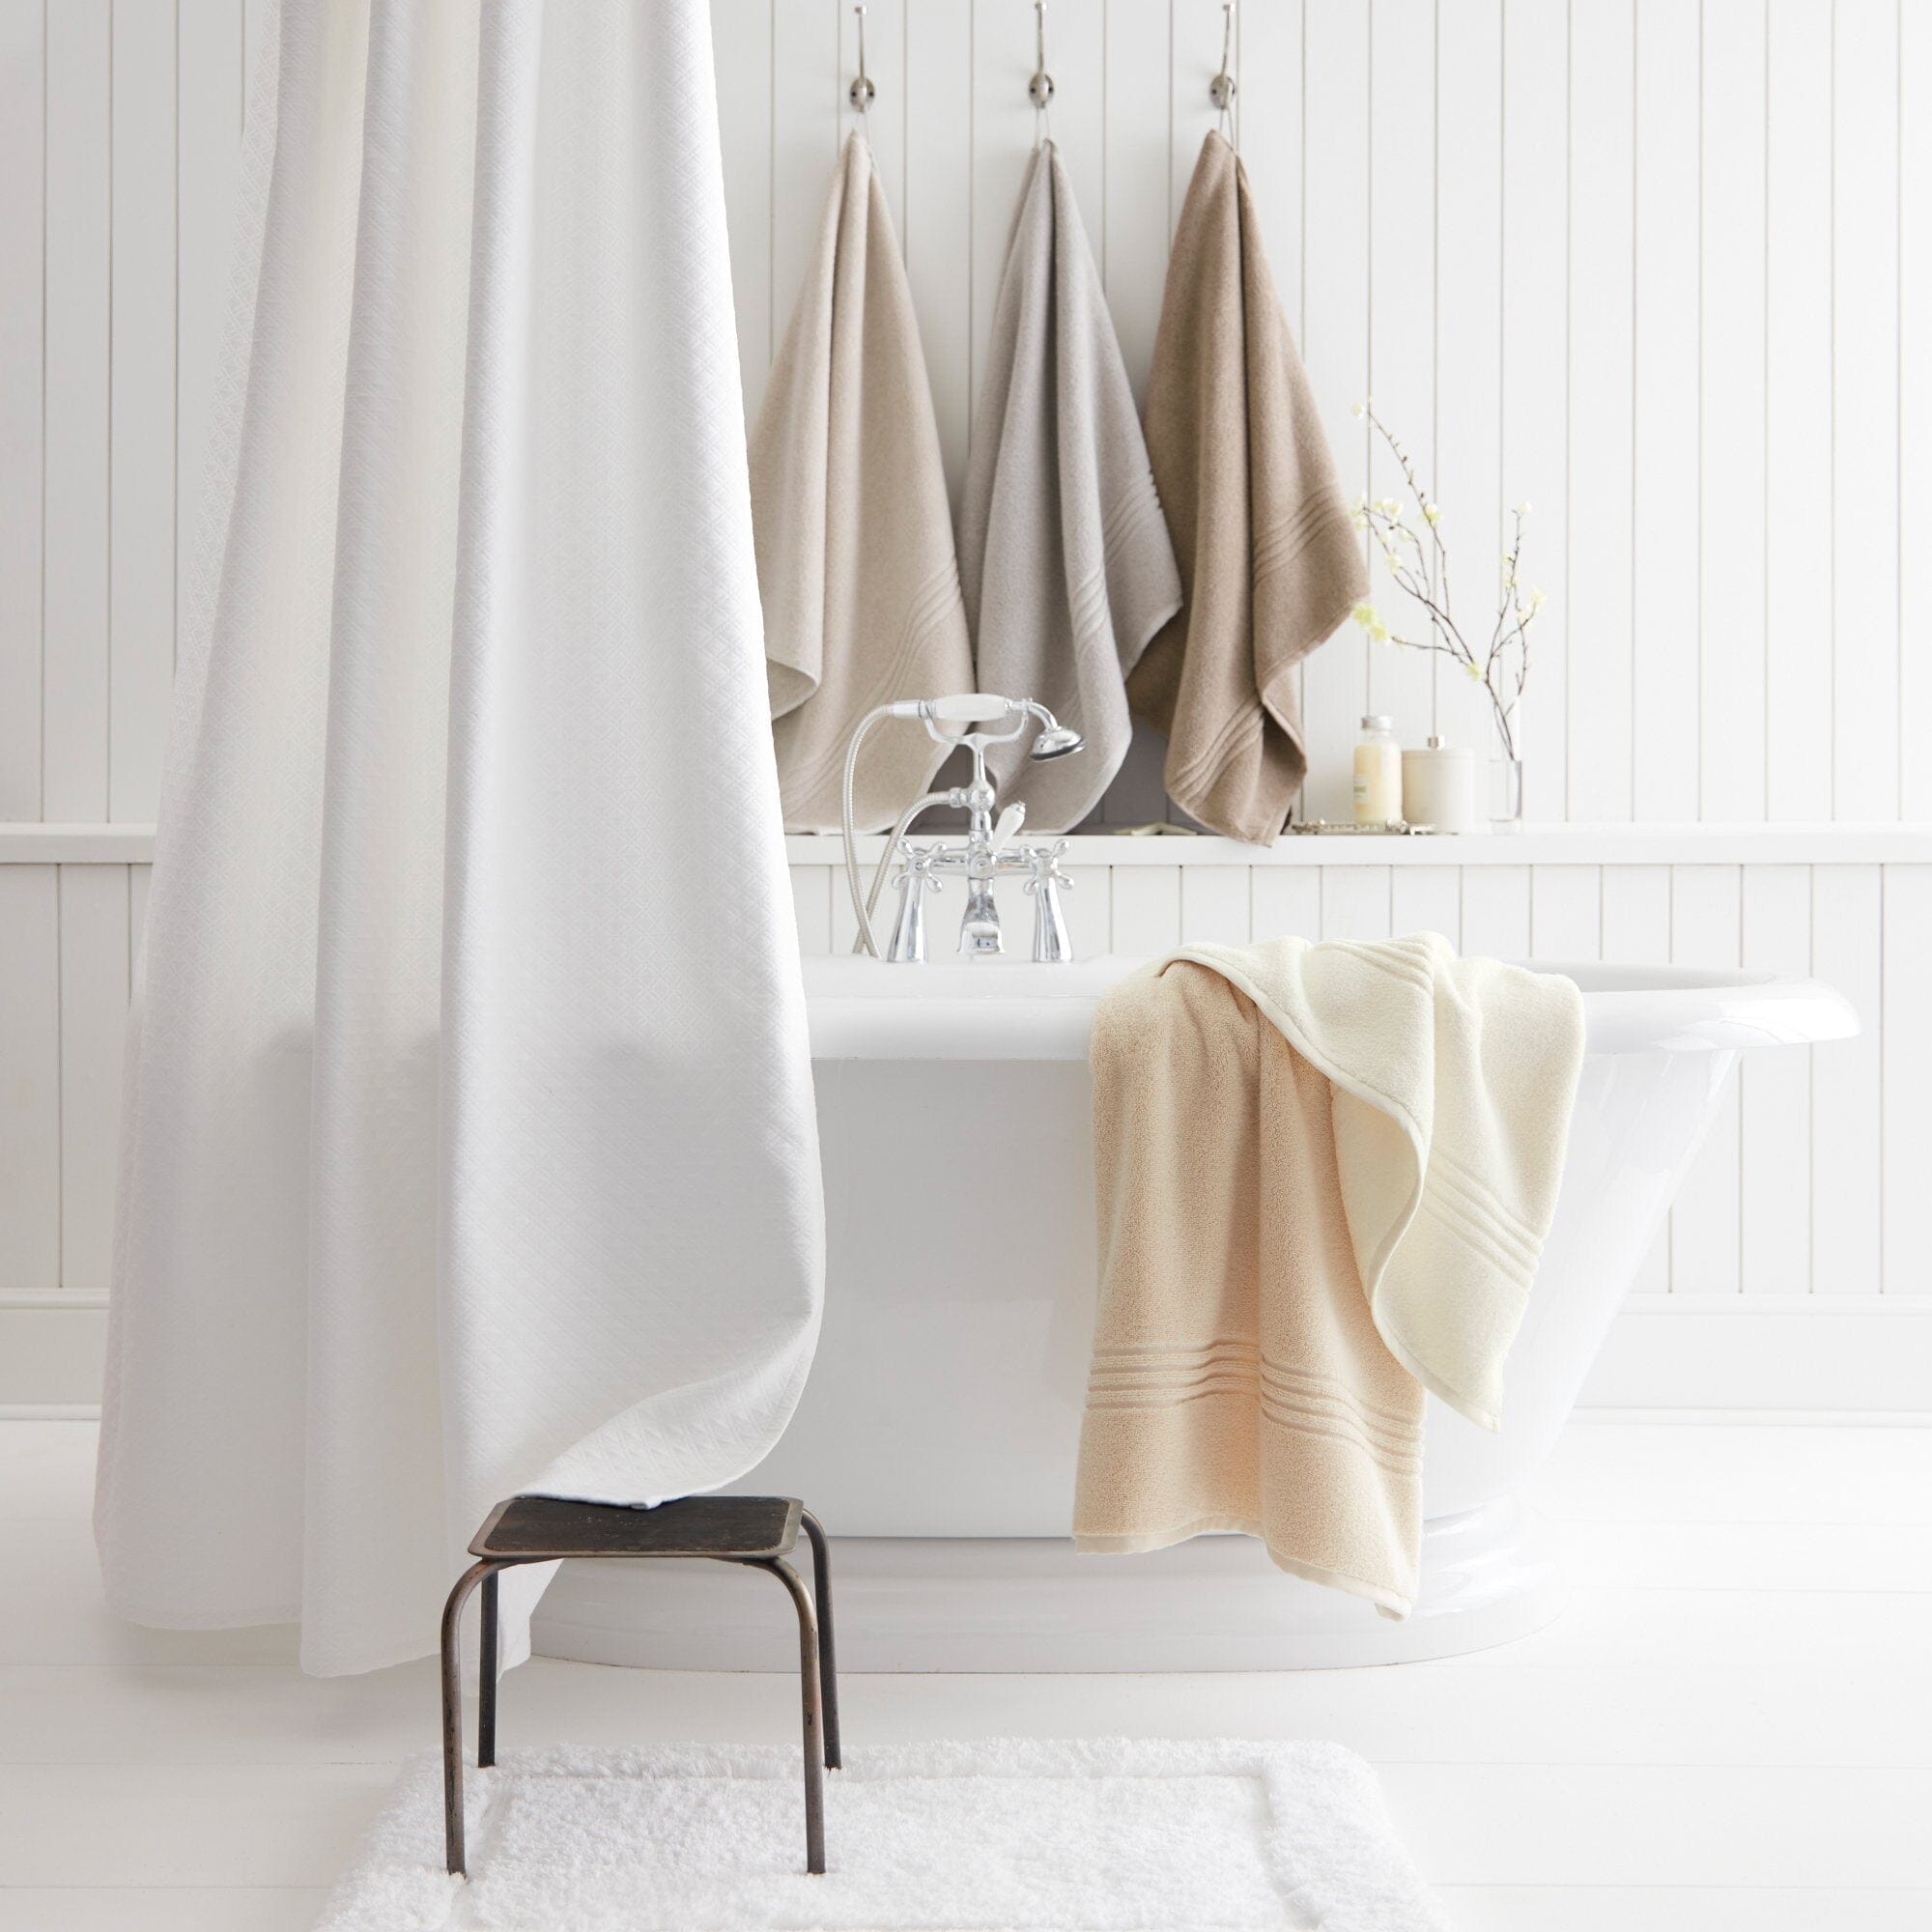 Set of Towels - Chelsea Bath Towels by Peacock Alley | Fig Linens and Home